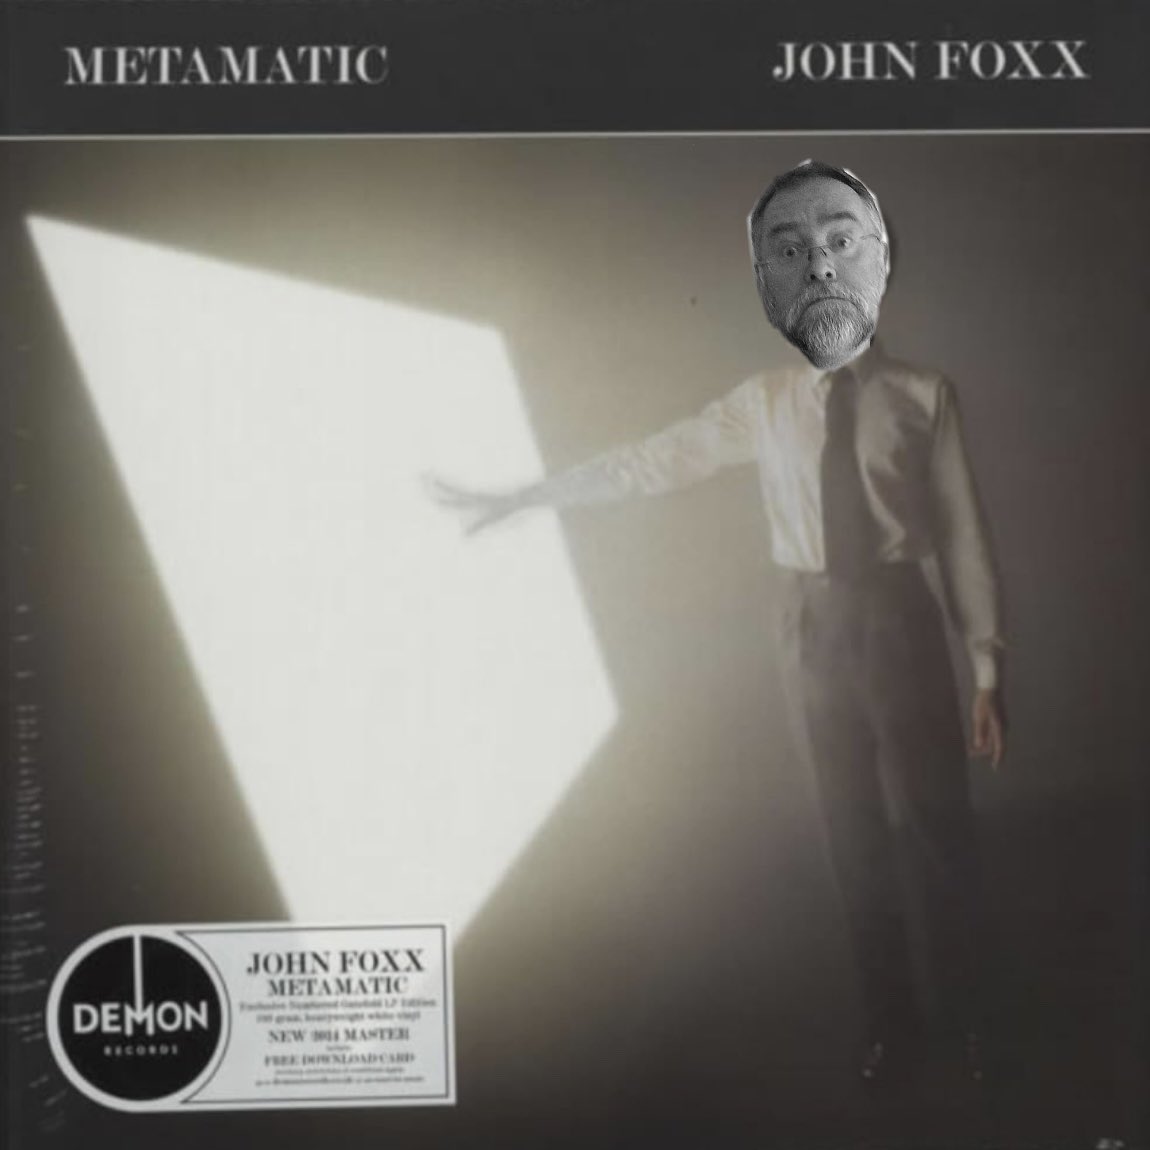 Fun fact. The #JohnFoxx album cover for #Metamatic is based on my stumbling down to the fridge at 2:00 in the morning only to find there is nothing there to eat